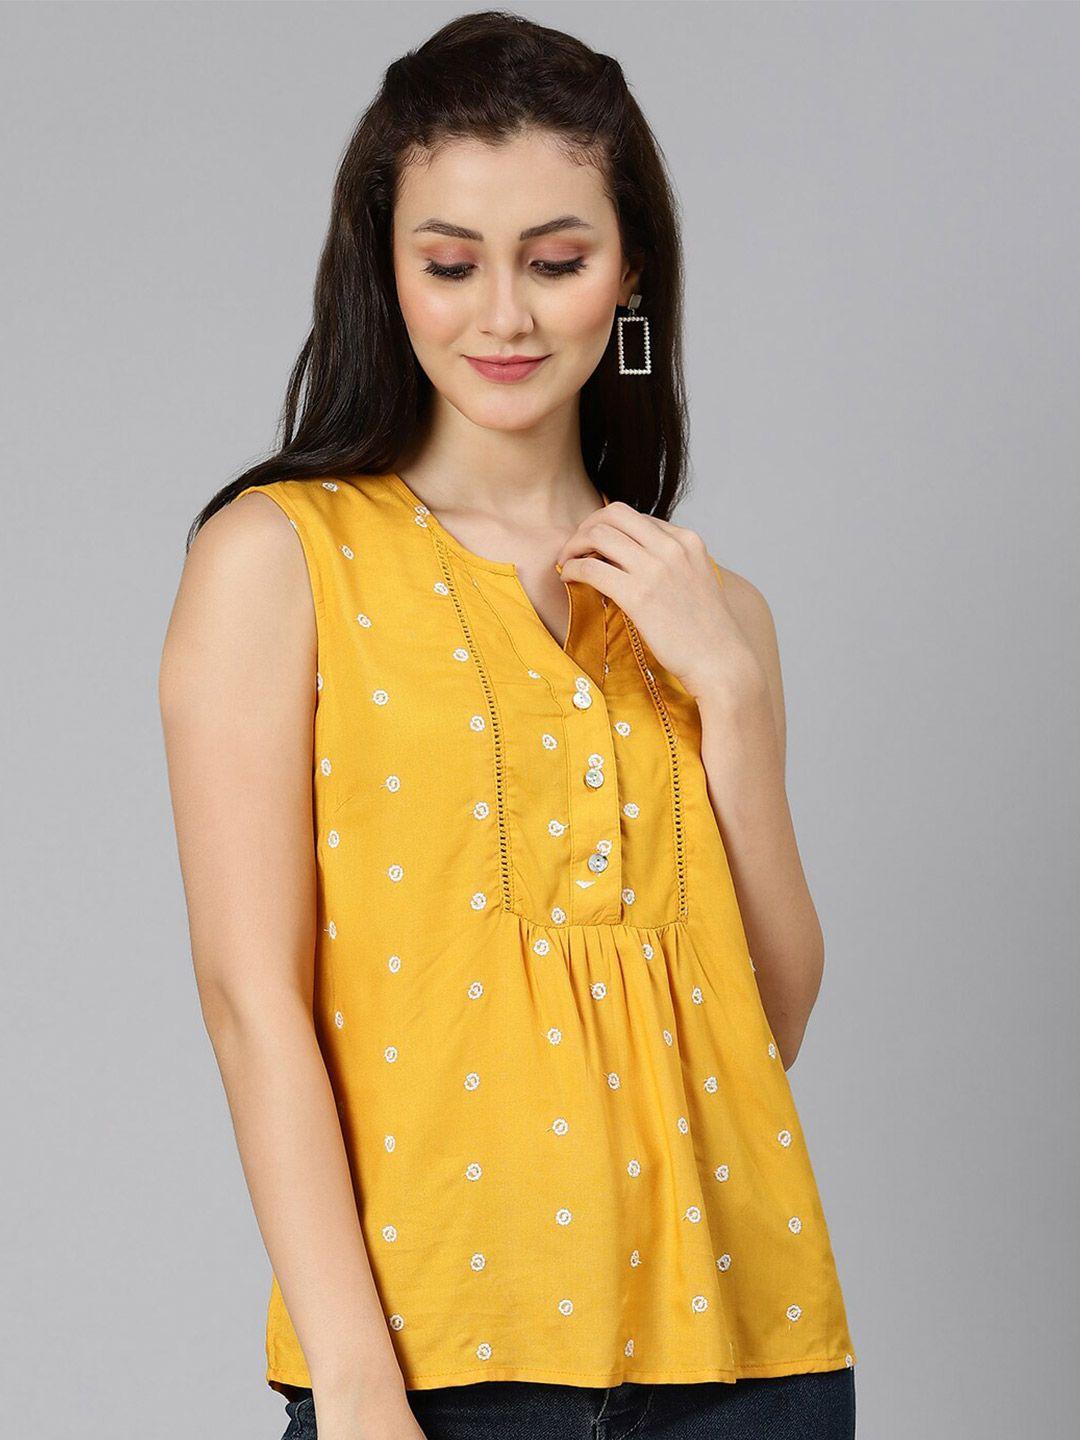 oxolloxo yellow floral print v neck top